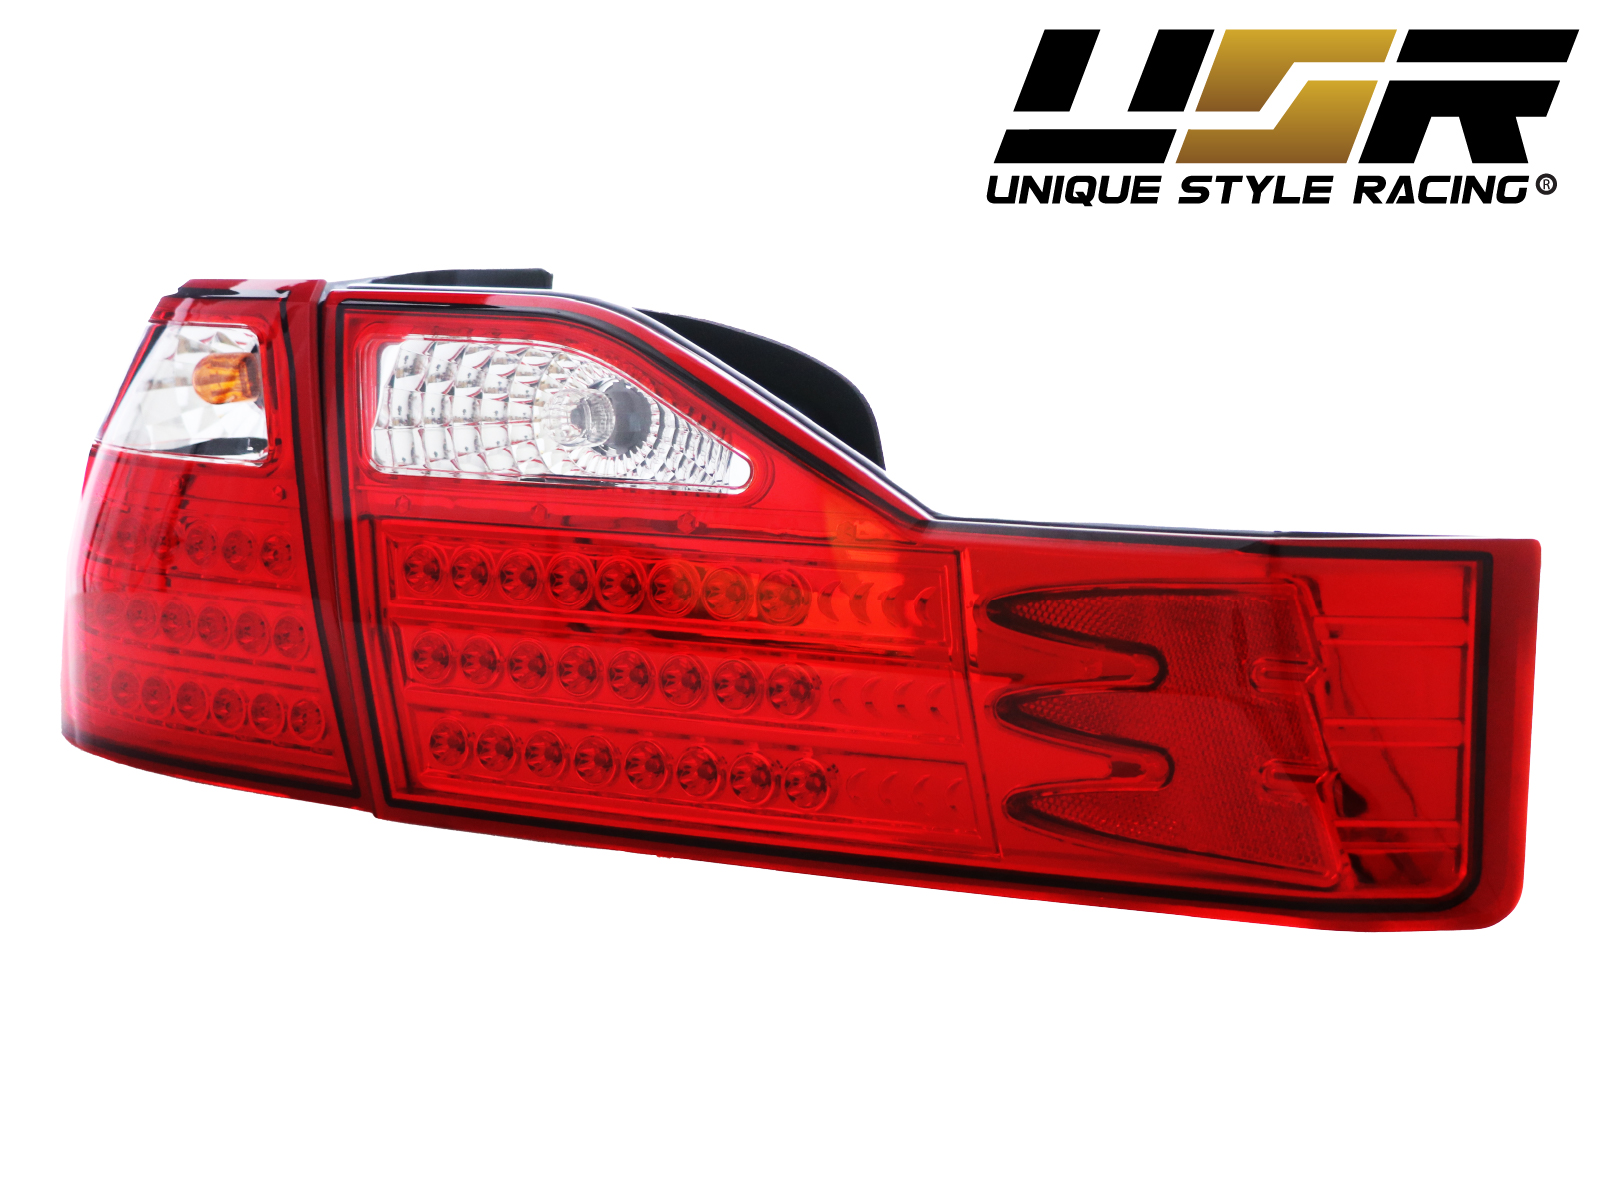 USR DEPO 01-02 Accord Tail Lights - JDM Style Red/Clear Lens LED Rear Tail  Lamps Set Compatible with 2001-2002 Honda Accord 4 Doors Sedan